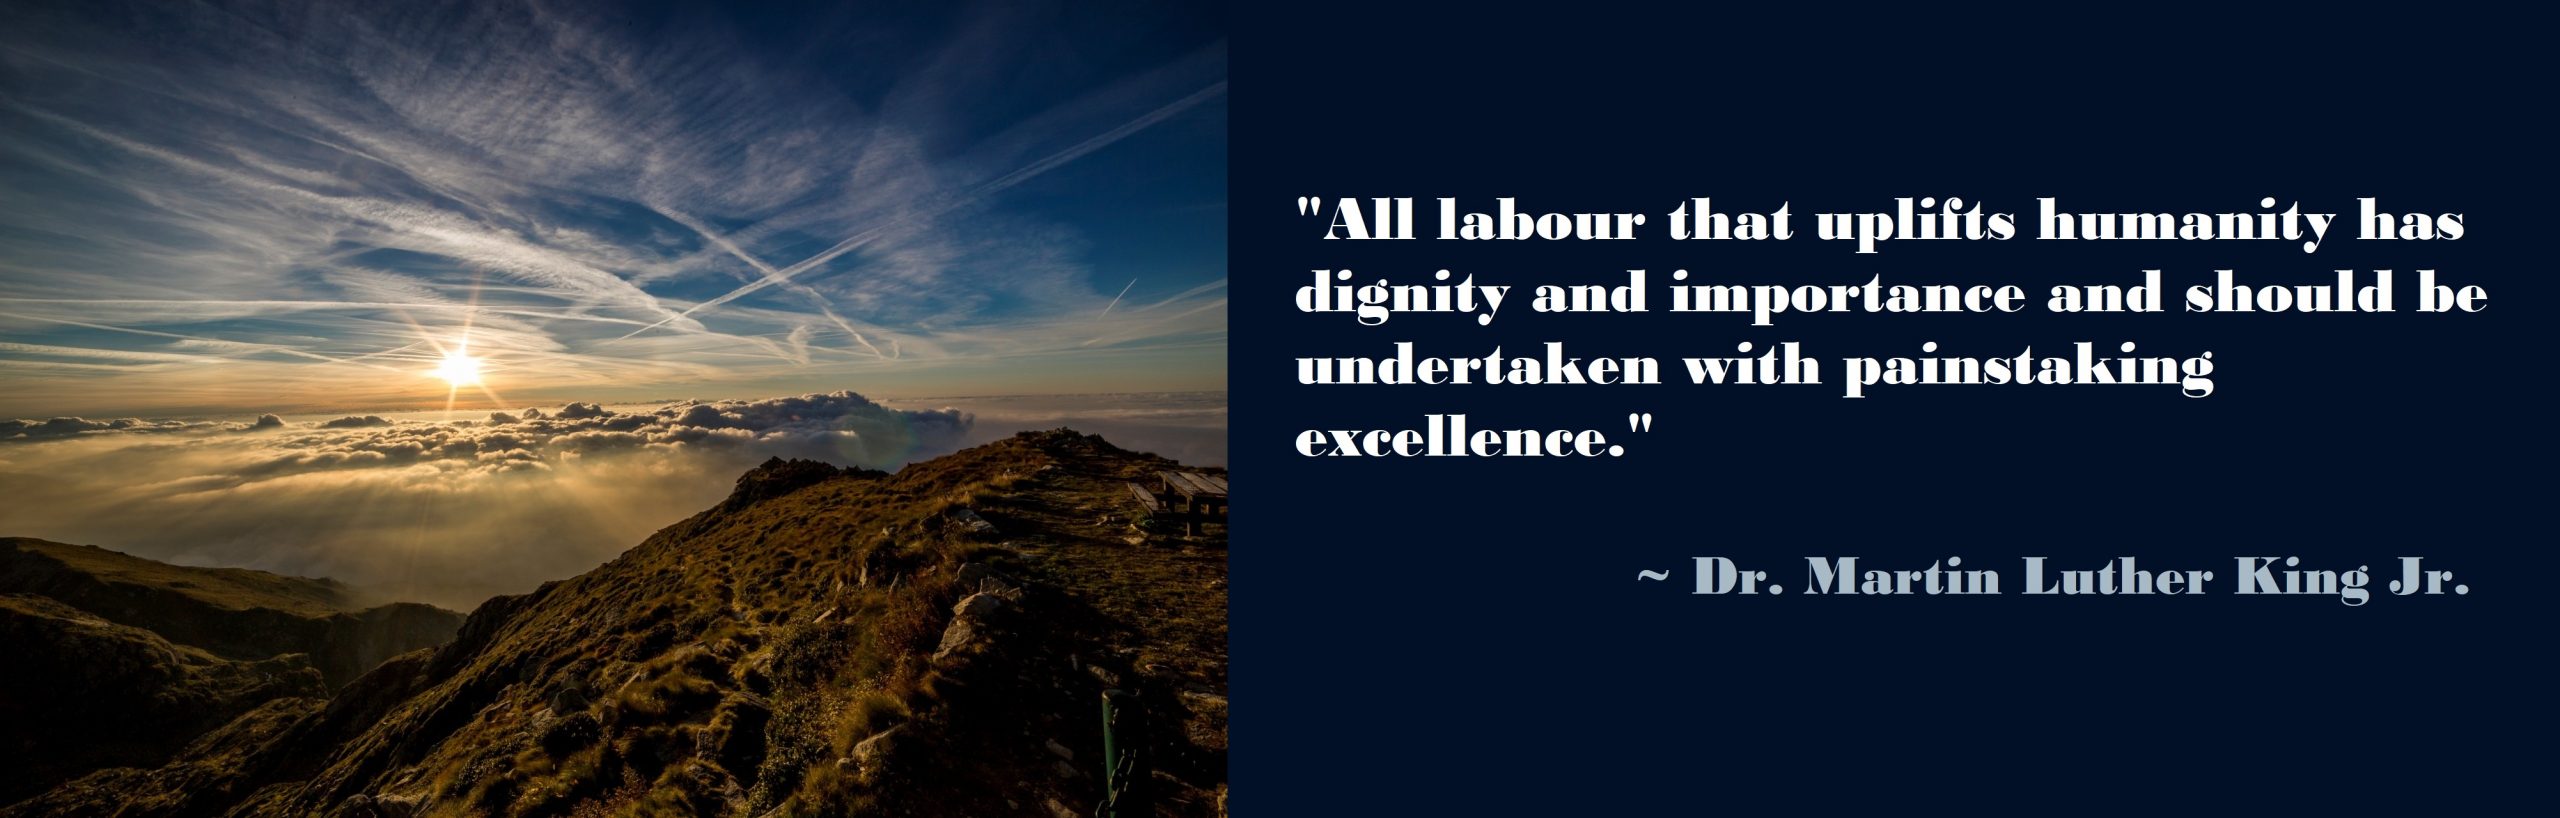 All labor that uplifts humanity has dignity and importance and should be undertaken with painstaking excellence – Dr. Martin Luther King Jr.